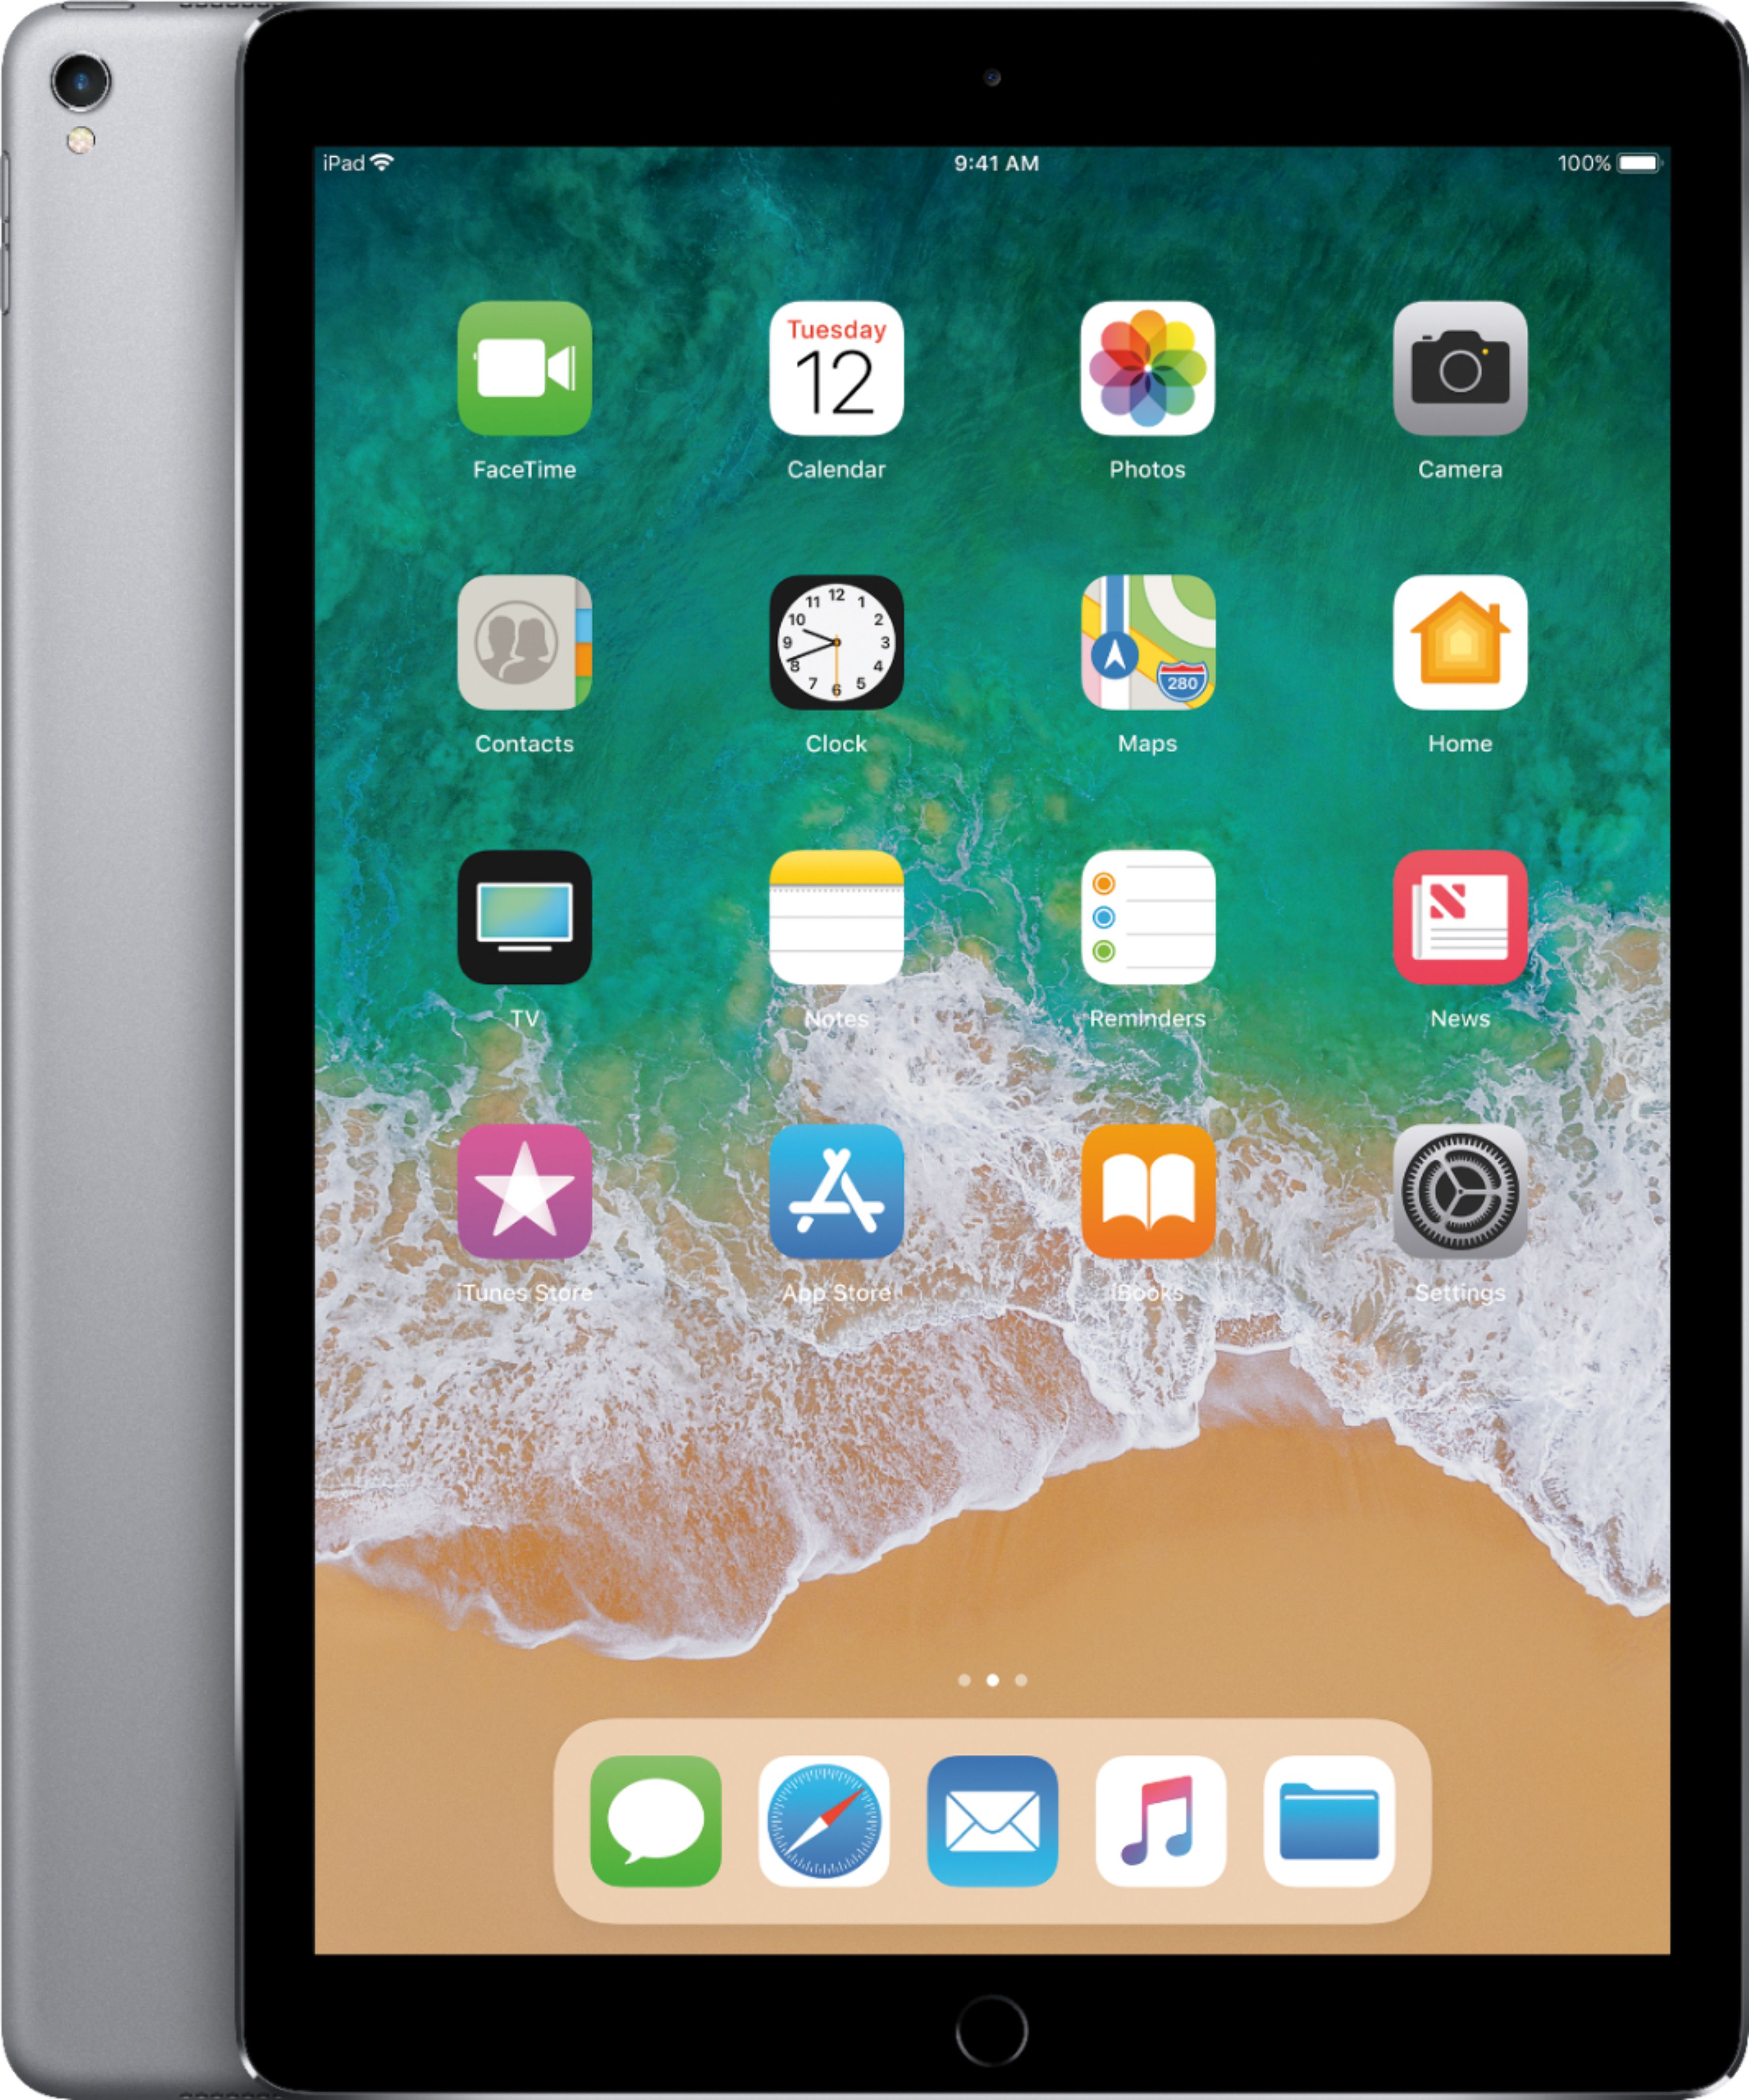 Best Buy: Apple 12.9-Inch iPad Pro generation) with Wi-Fi 64GB Space Gray MQDA2LL/A